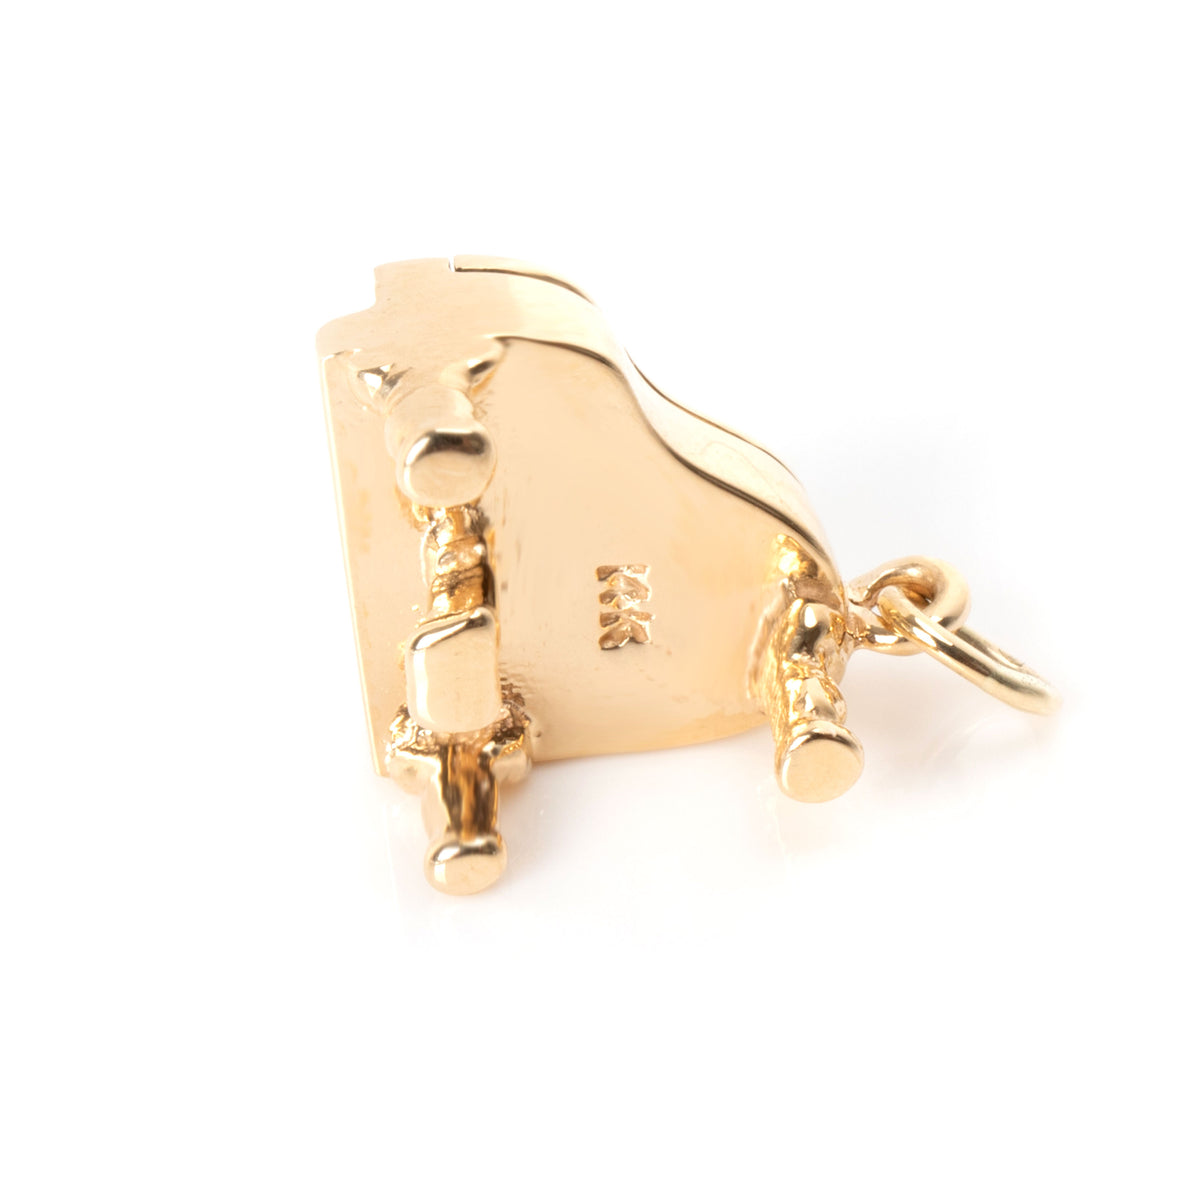 Vintage Piano Charm in 14K Yellow Gold